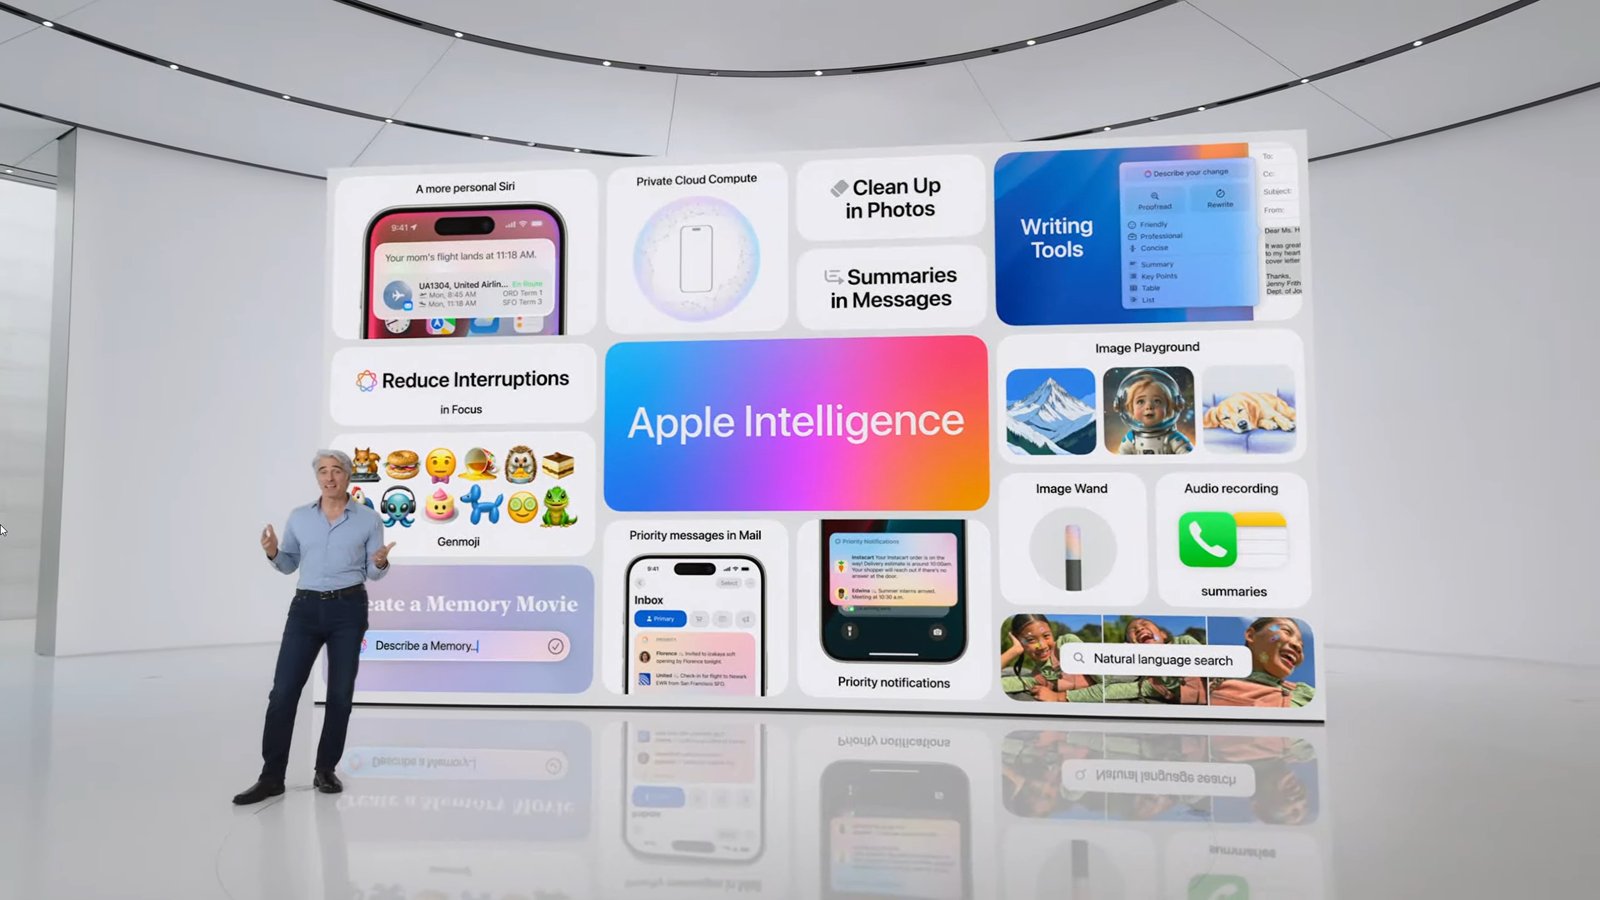 Apple Intelligence may initially require a waitlist before you can try it